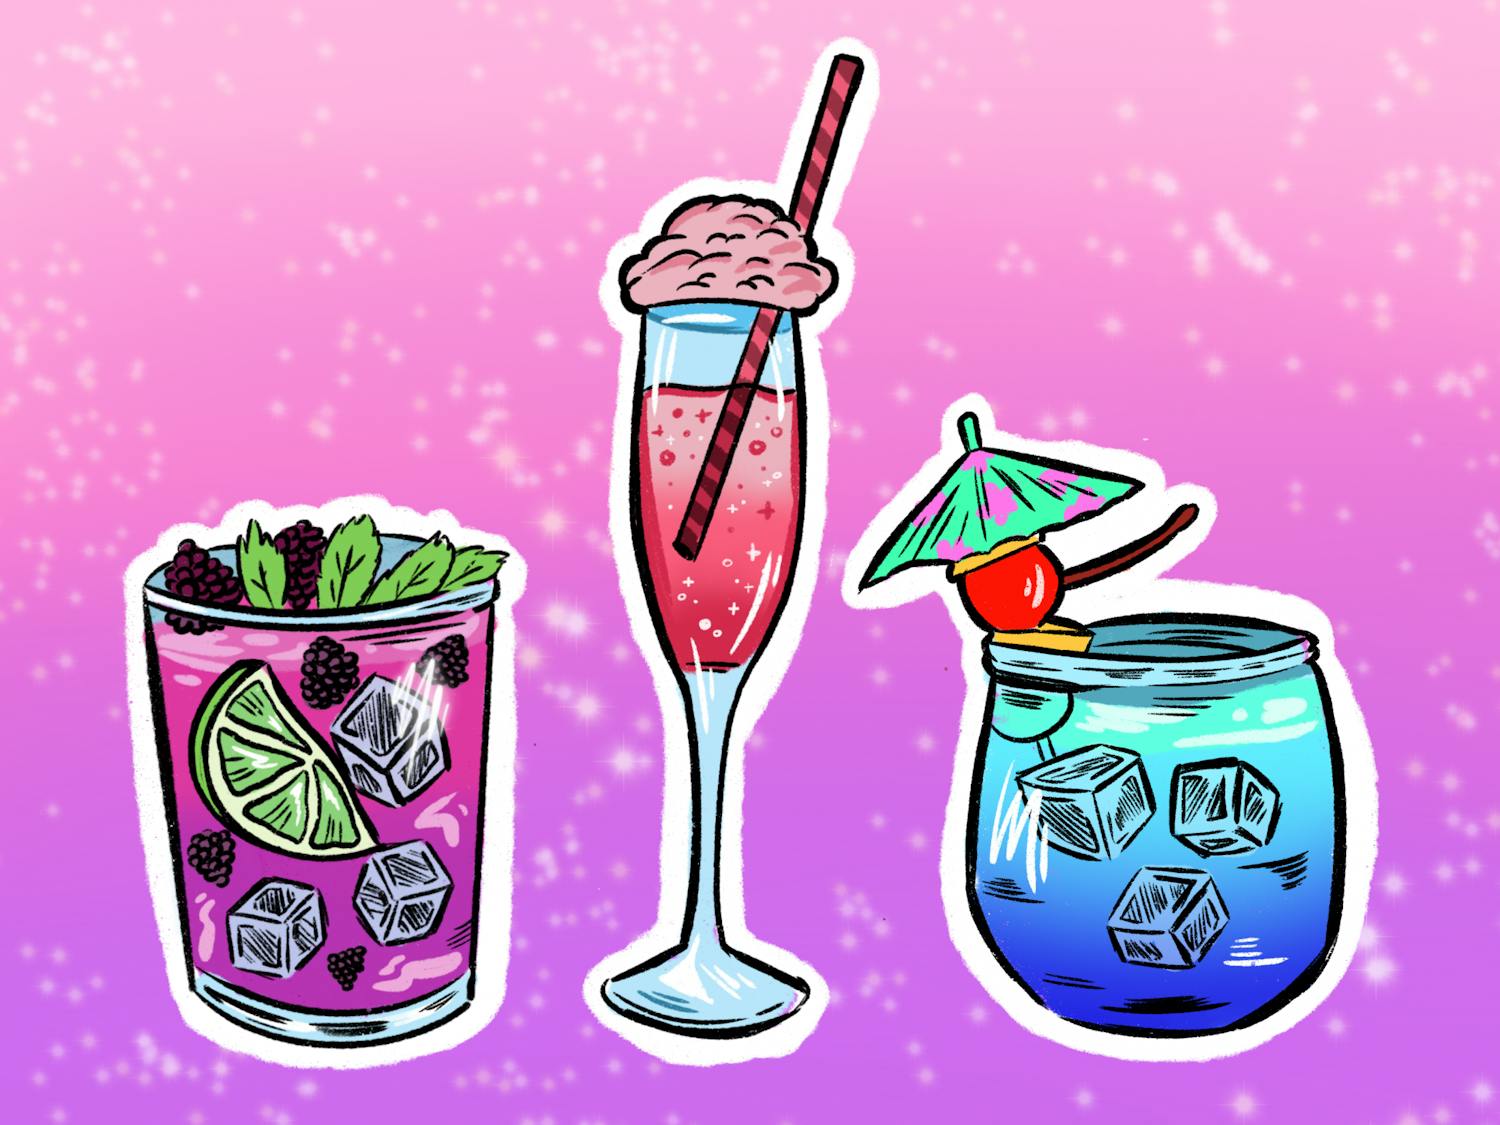 CALHOUN_What your alcoholic drink of choice says about you?_LA.png